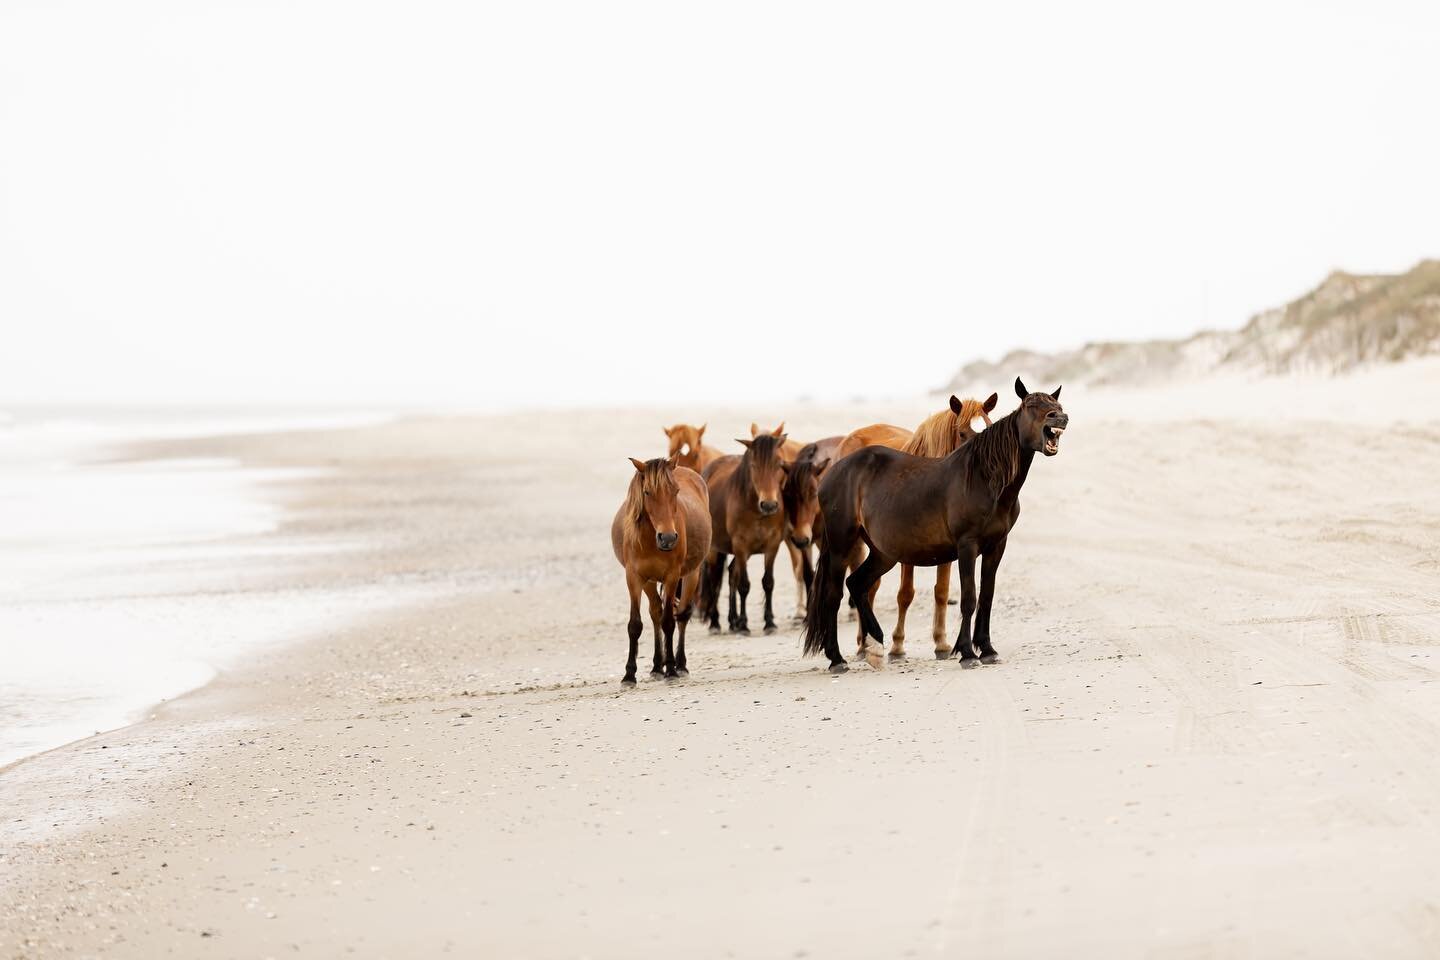 Taking it back to a really special moment in Corolla, NC where we got to see wild horses on the beach 🐴 #obx

The one on the far right cracks me up every time 😅